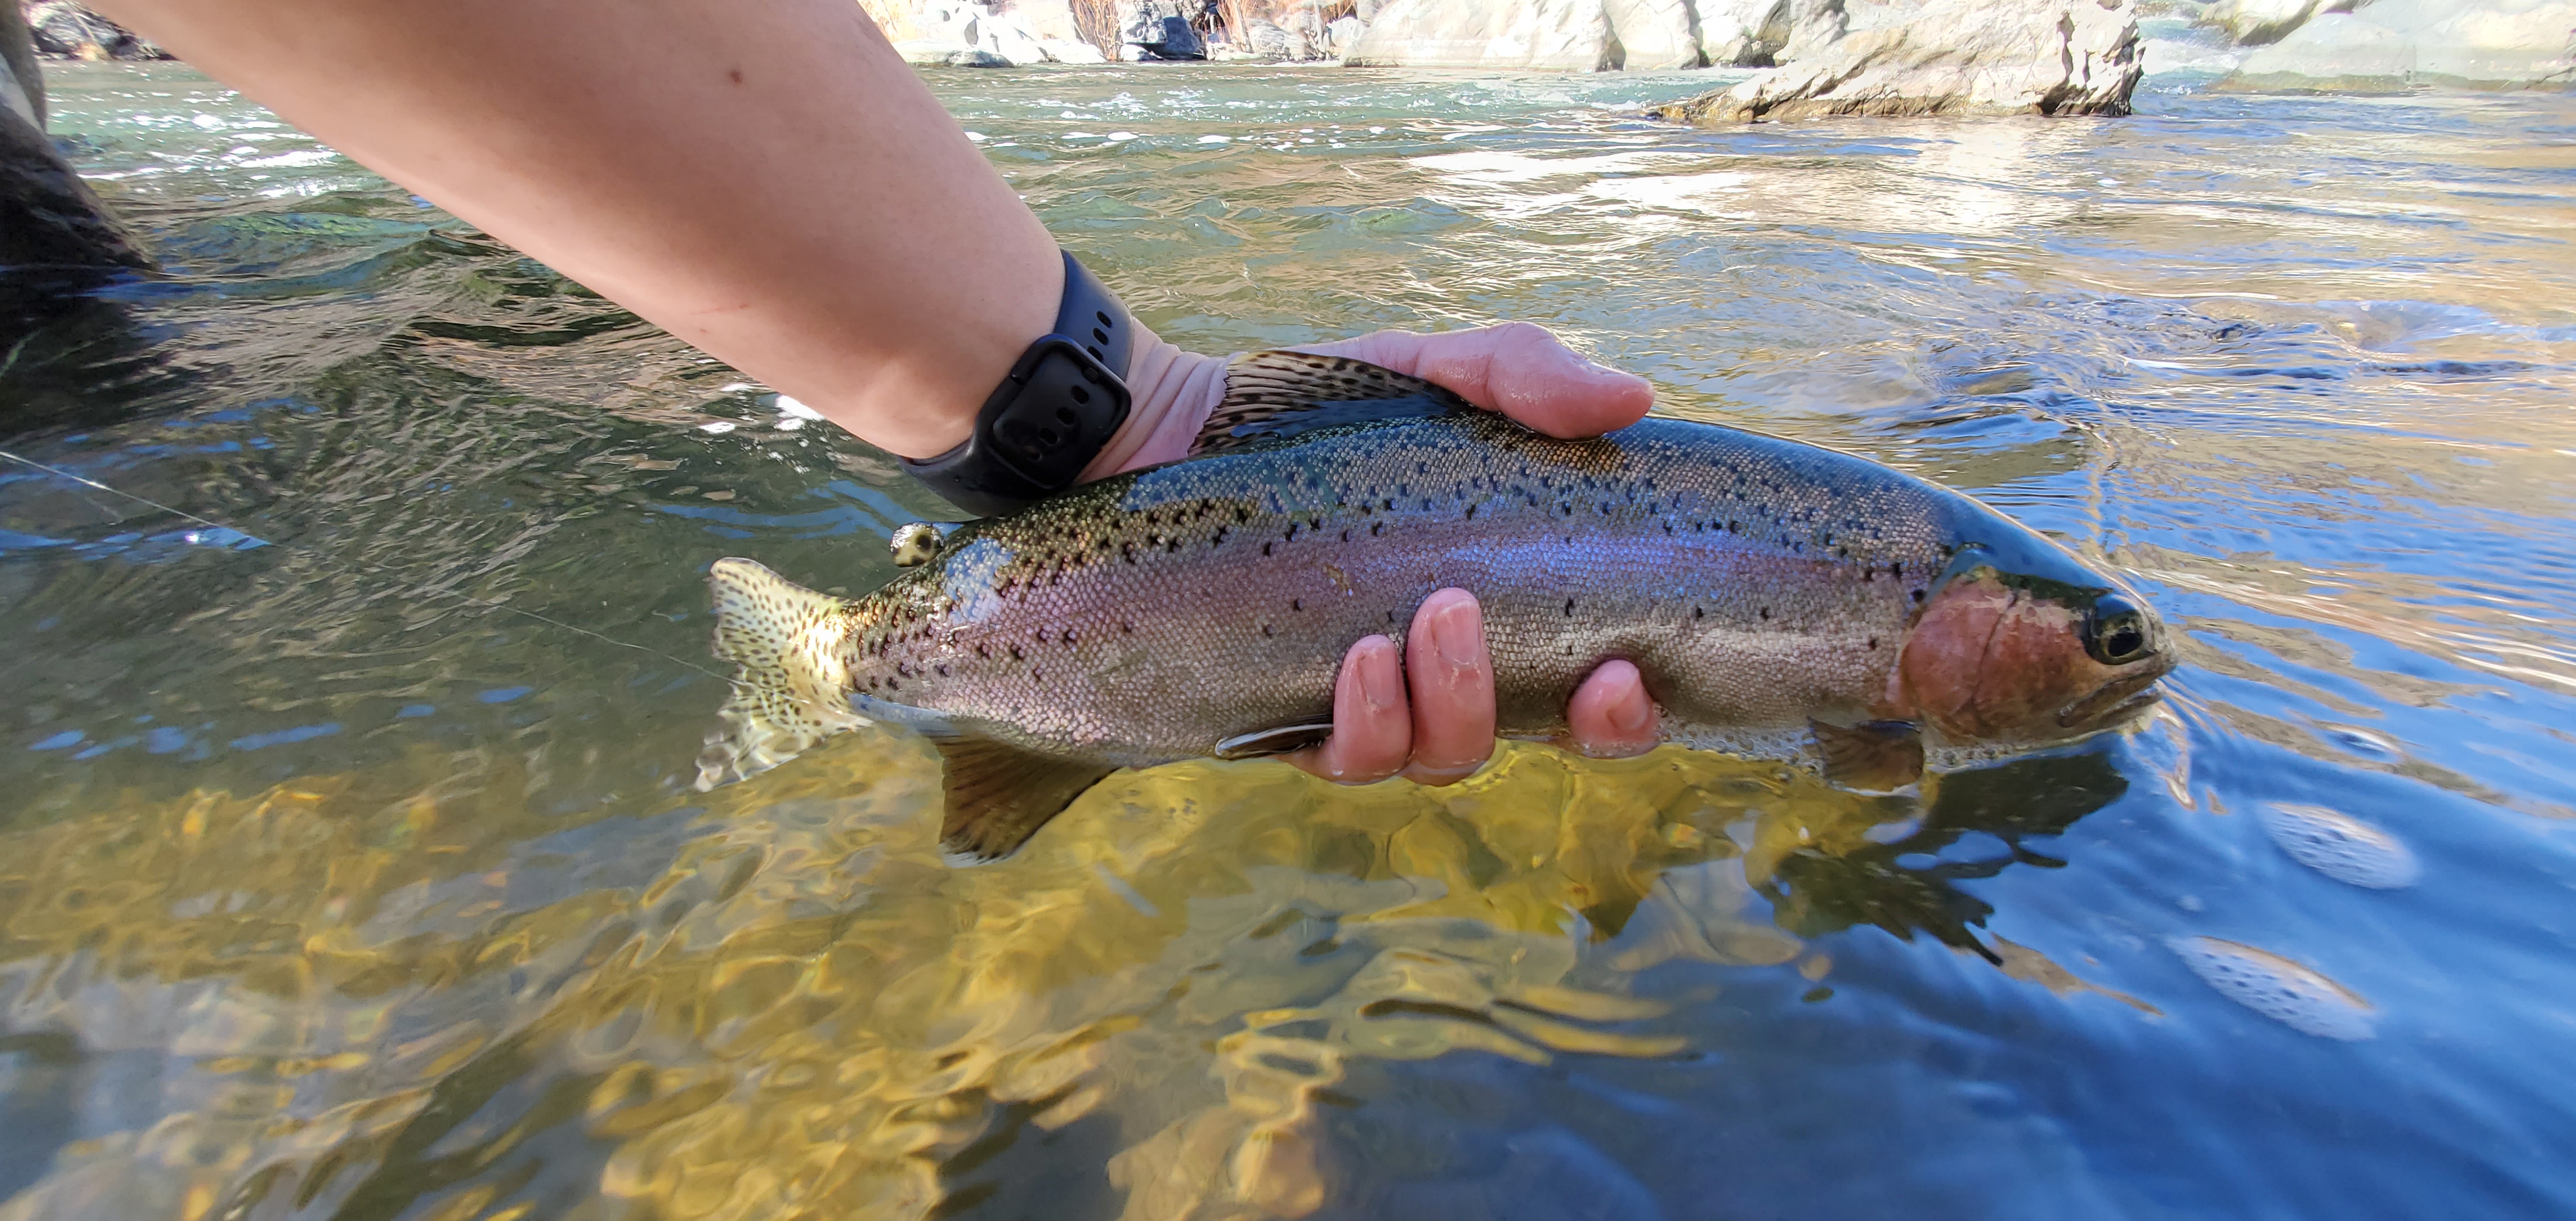 Trout & Feather: August - Casting Across